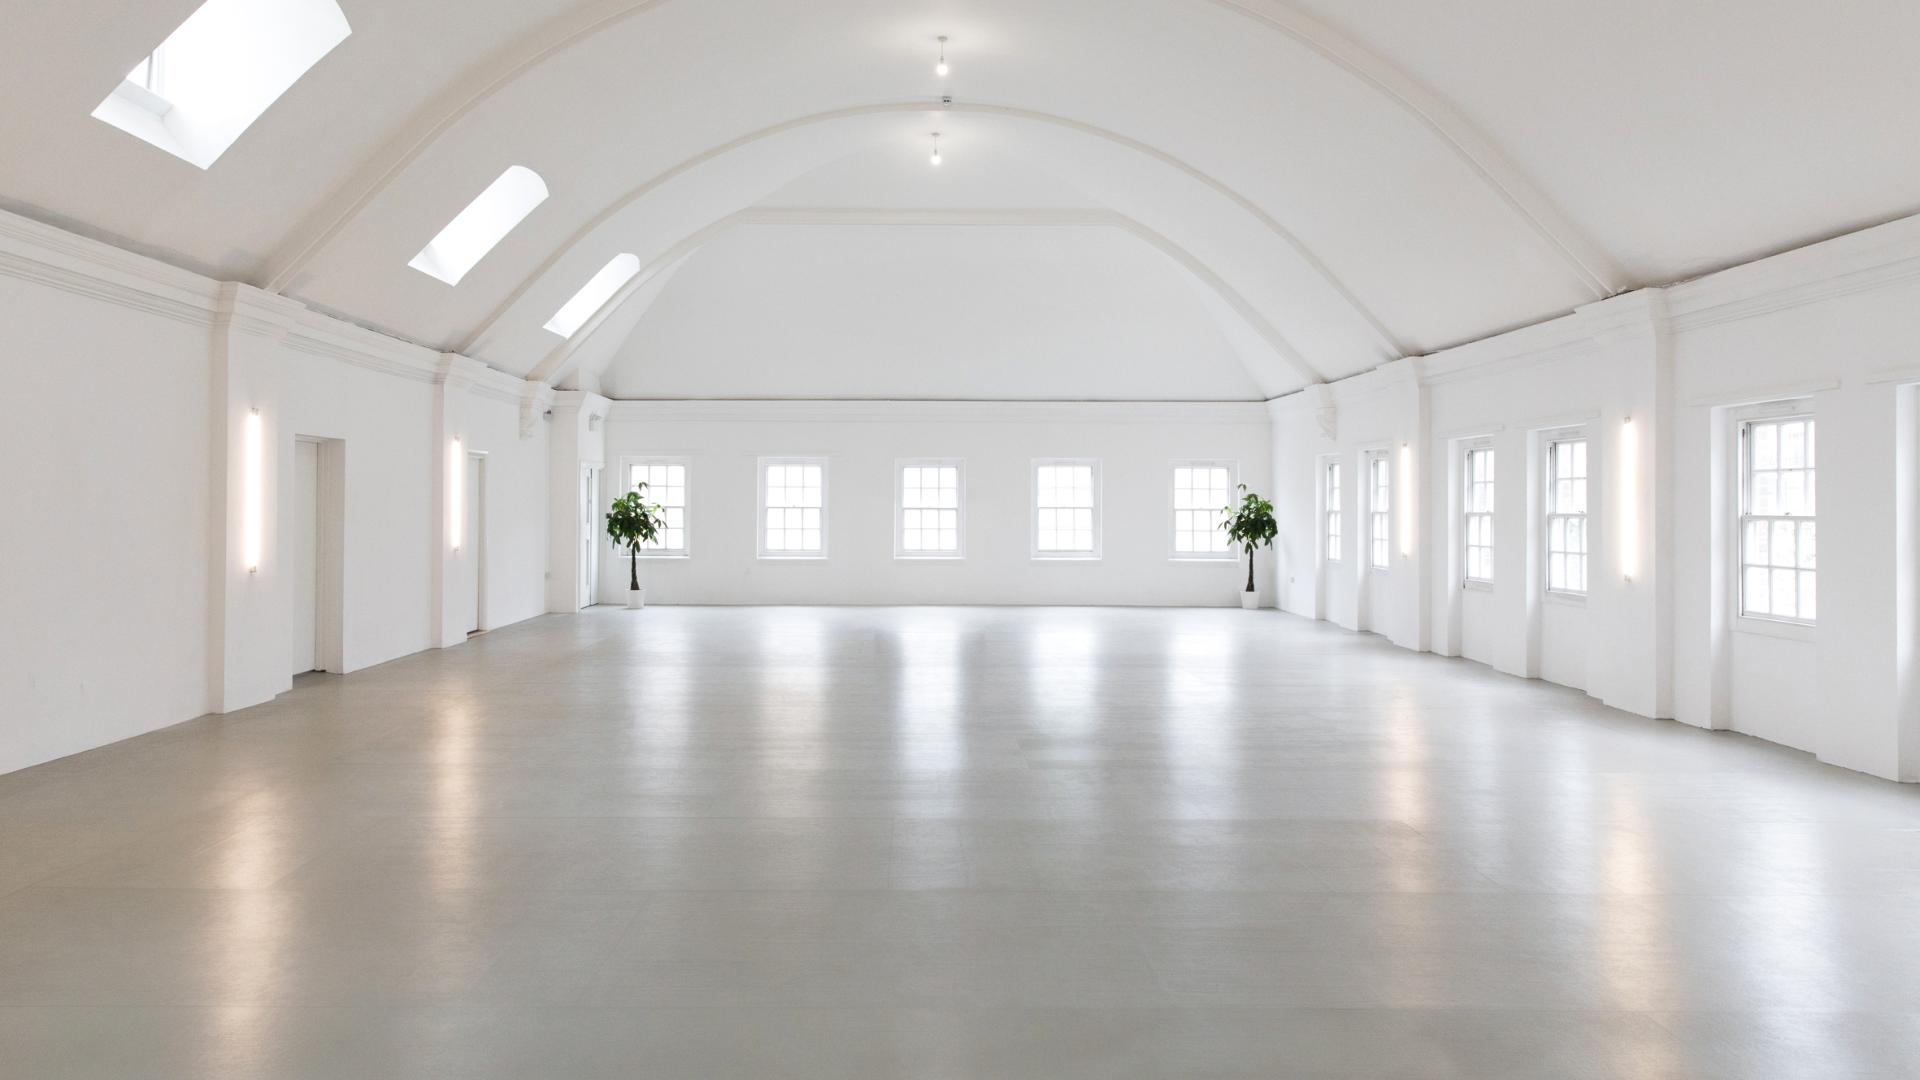 Halls for Hire in South East London